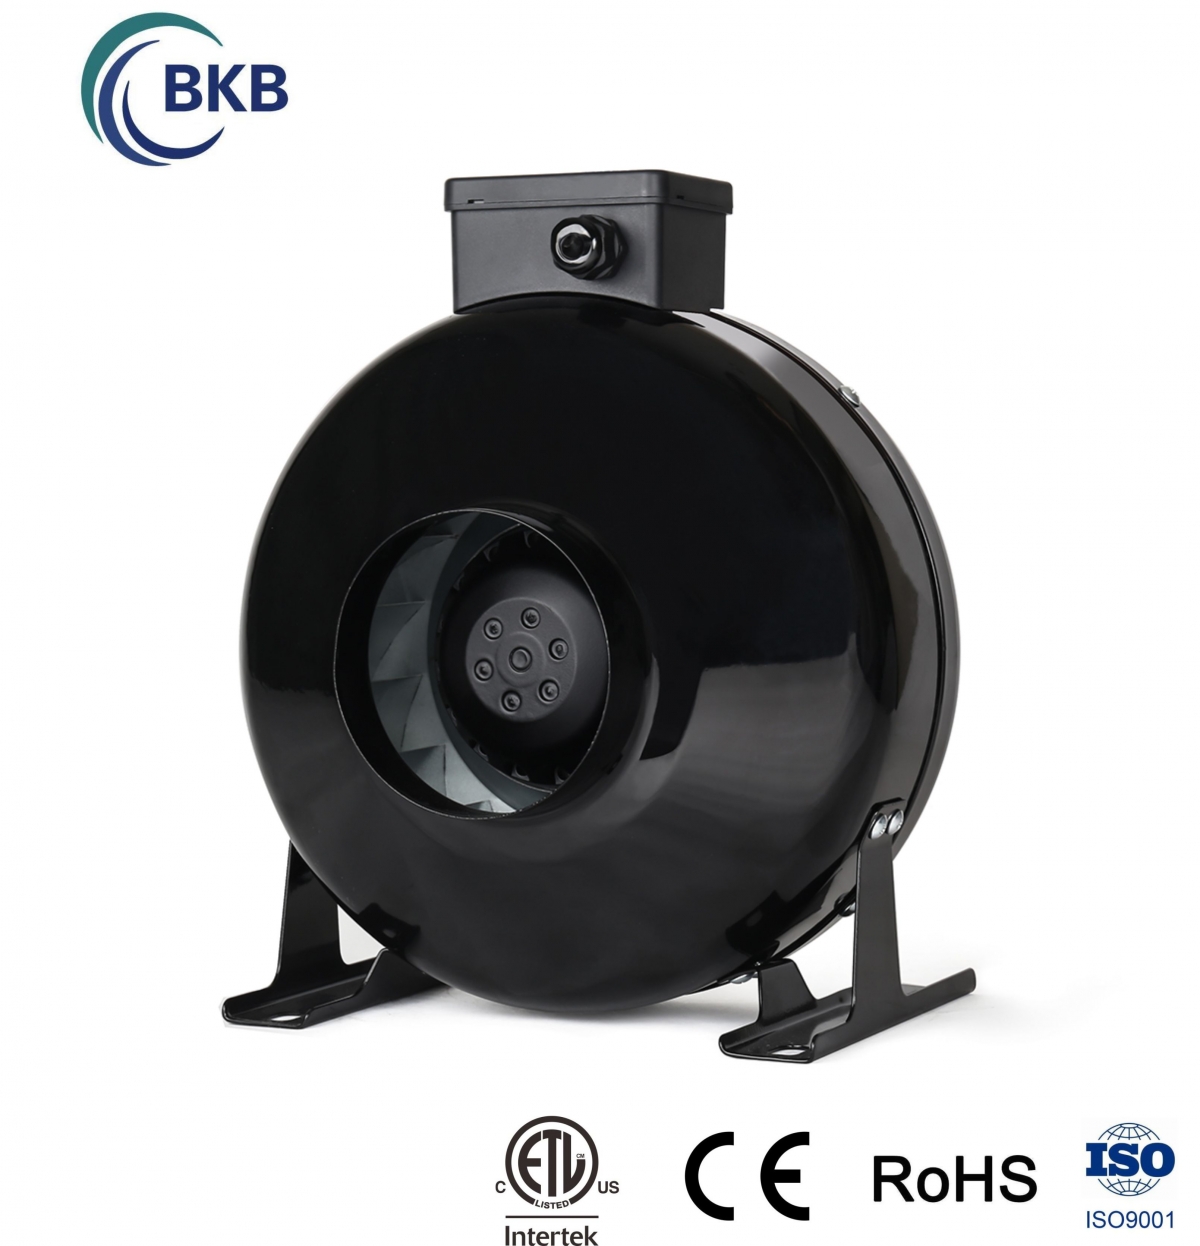 HOME ELECTRONIC EQUIPMENT EXHAUST ELECTRIC AIR BLOWER Manufacturer SUPPLIER in China.-SUNLIGHT BLOWER,Centrifugal Fans, Inline Fans,Motors,Backward curved centrifugal fans ,Forward curved centrifugal fans ,inlet fans, EC fans